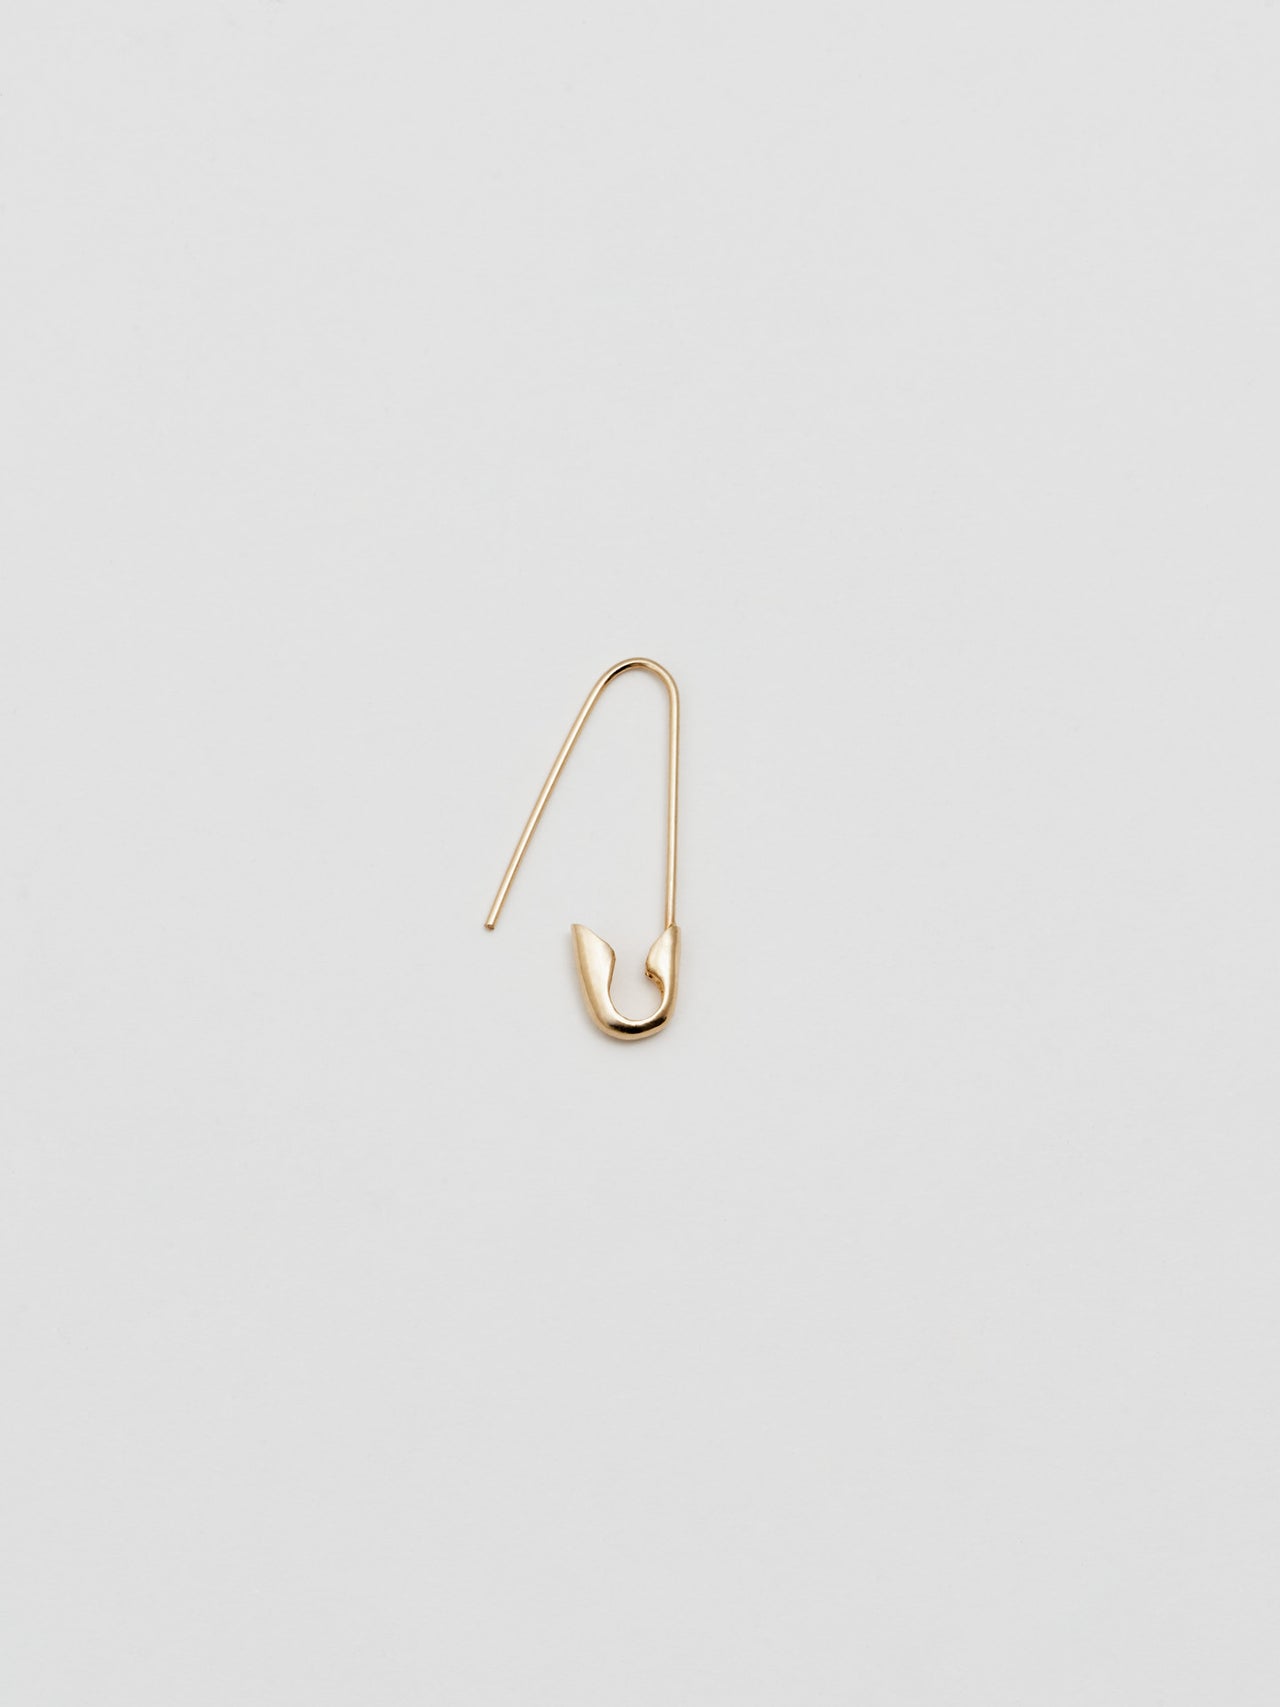 Detail product shot of the Safety Pin Earring on clasped (14Kt Shiny Yellow Gold Safety Pin Earring Length: 21.35mm) Background: Grey backdrop